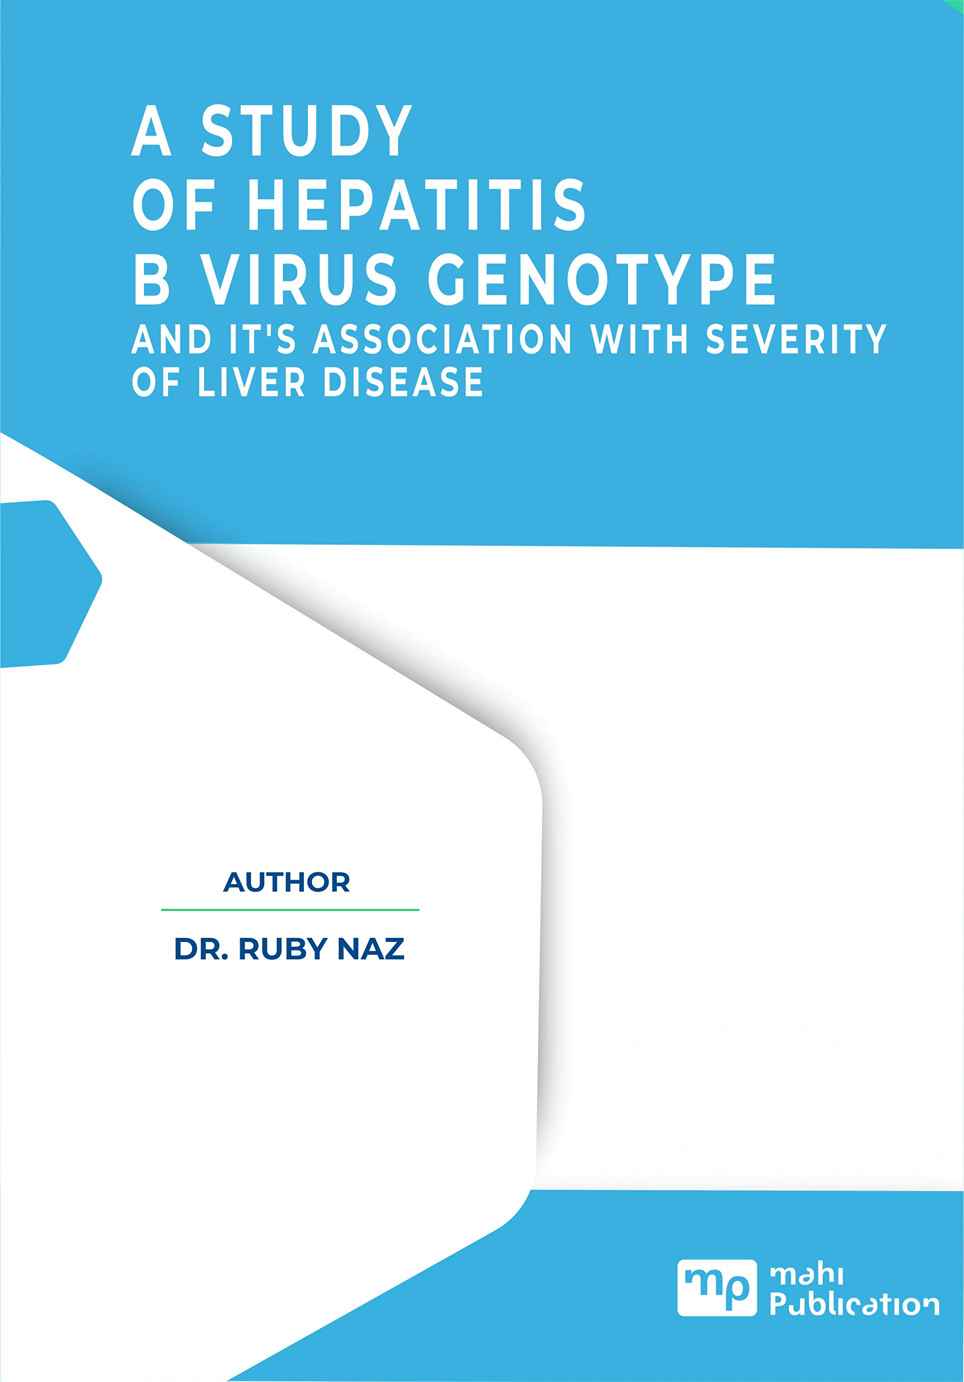 A Study Of Hepatitis B Virus Genotype And It's Association With Severity Of Liver Disease